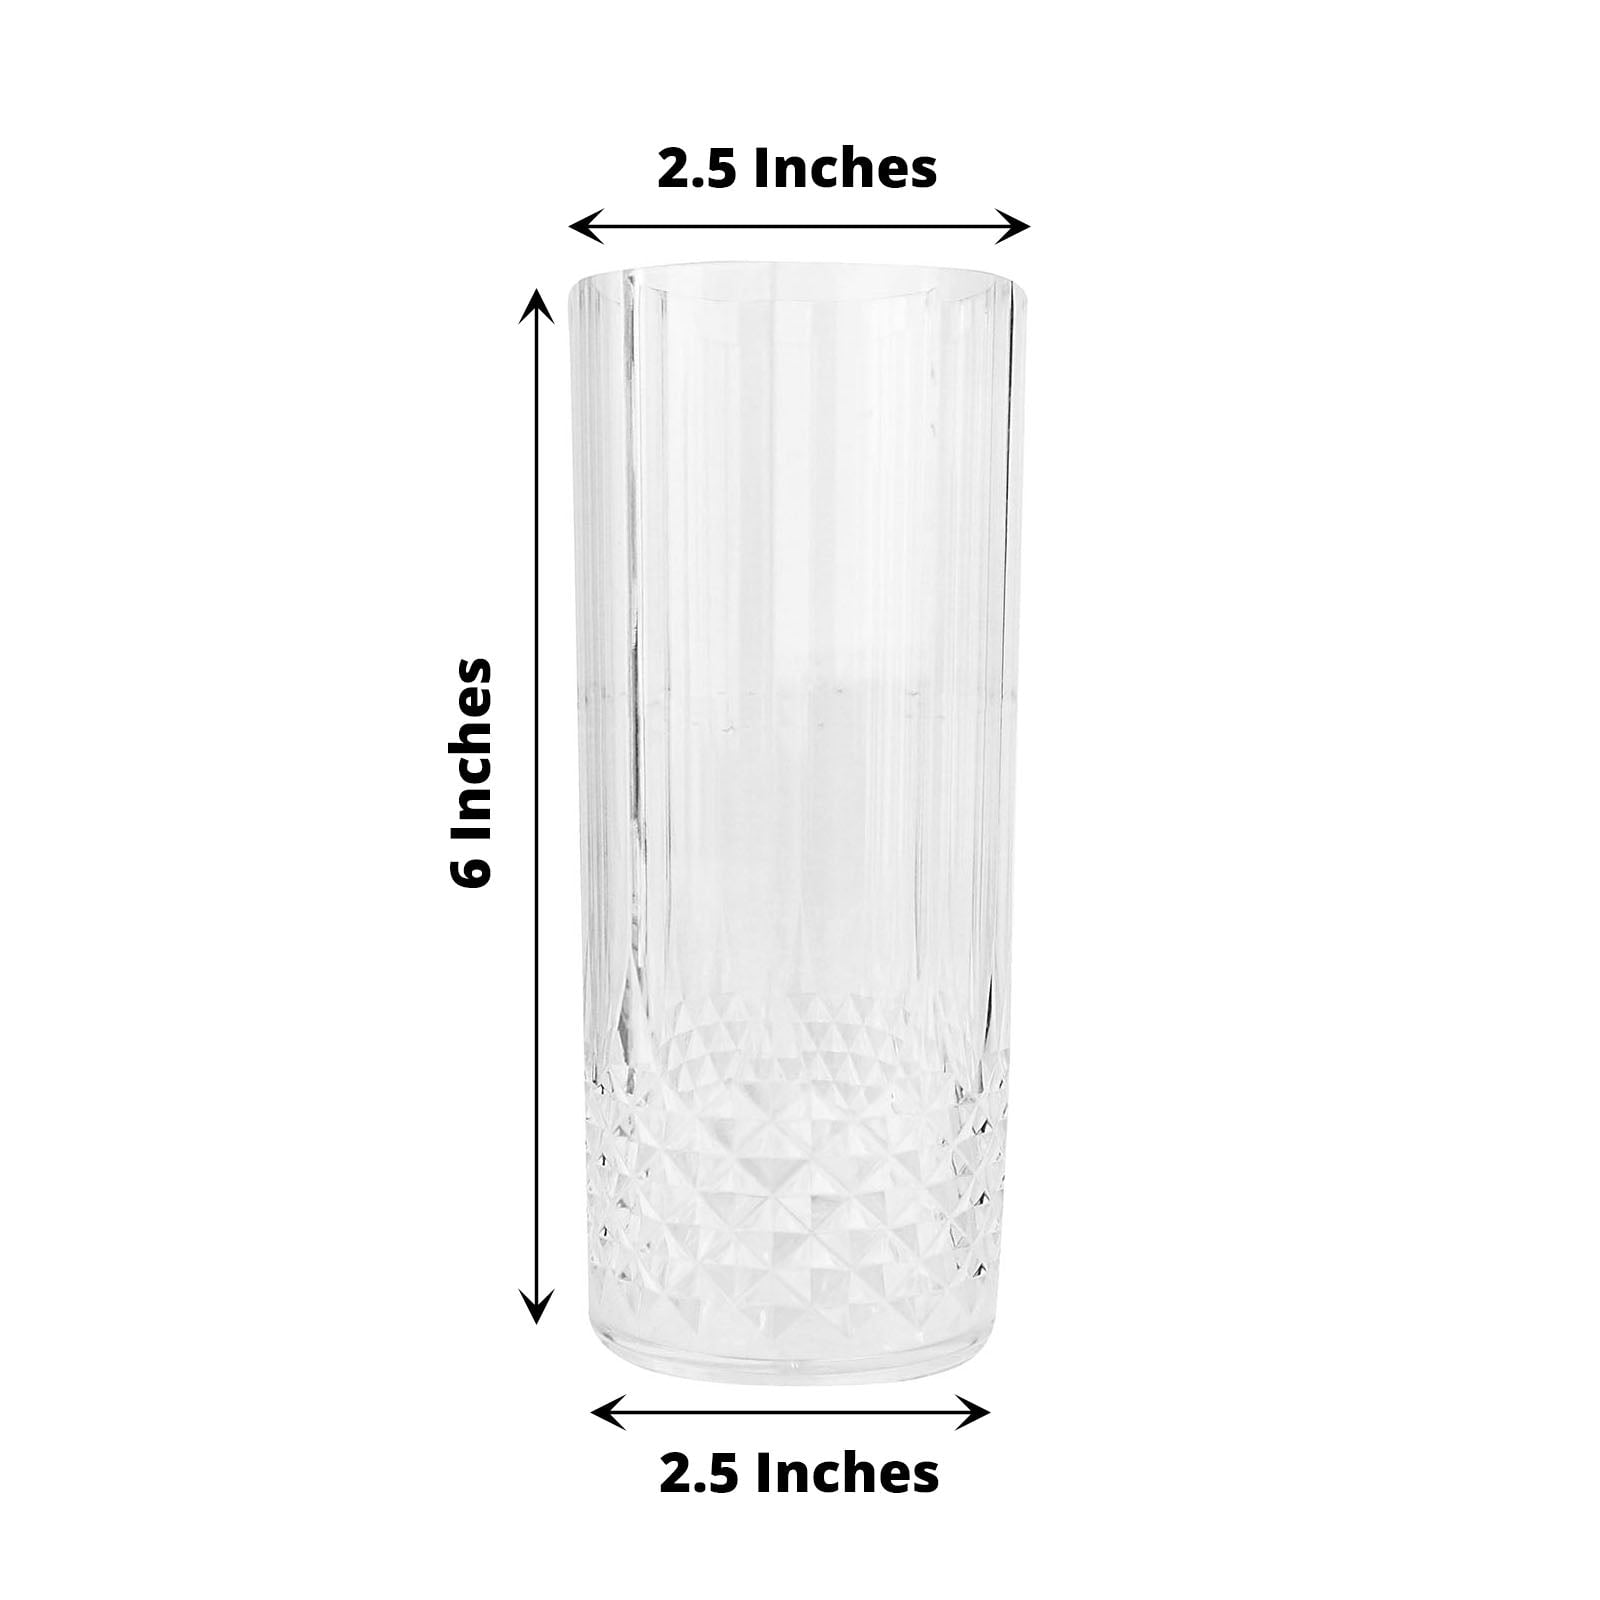 Crystal Like 16oz. Plastic Highball Glasses, 4ct., Size: One size, Clear